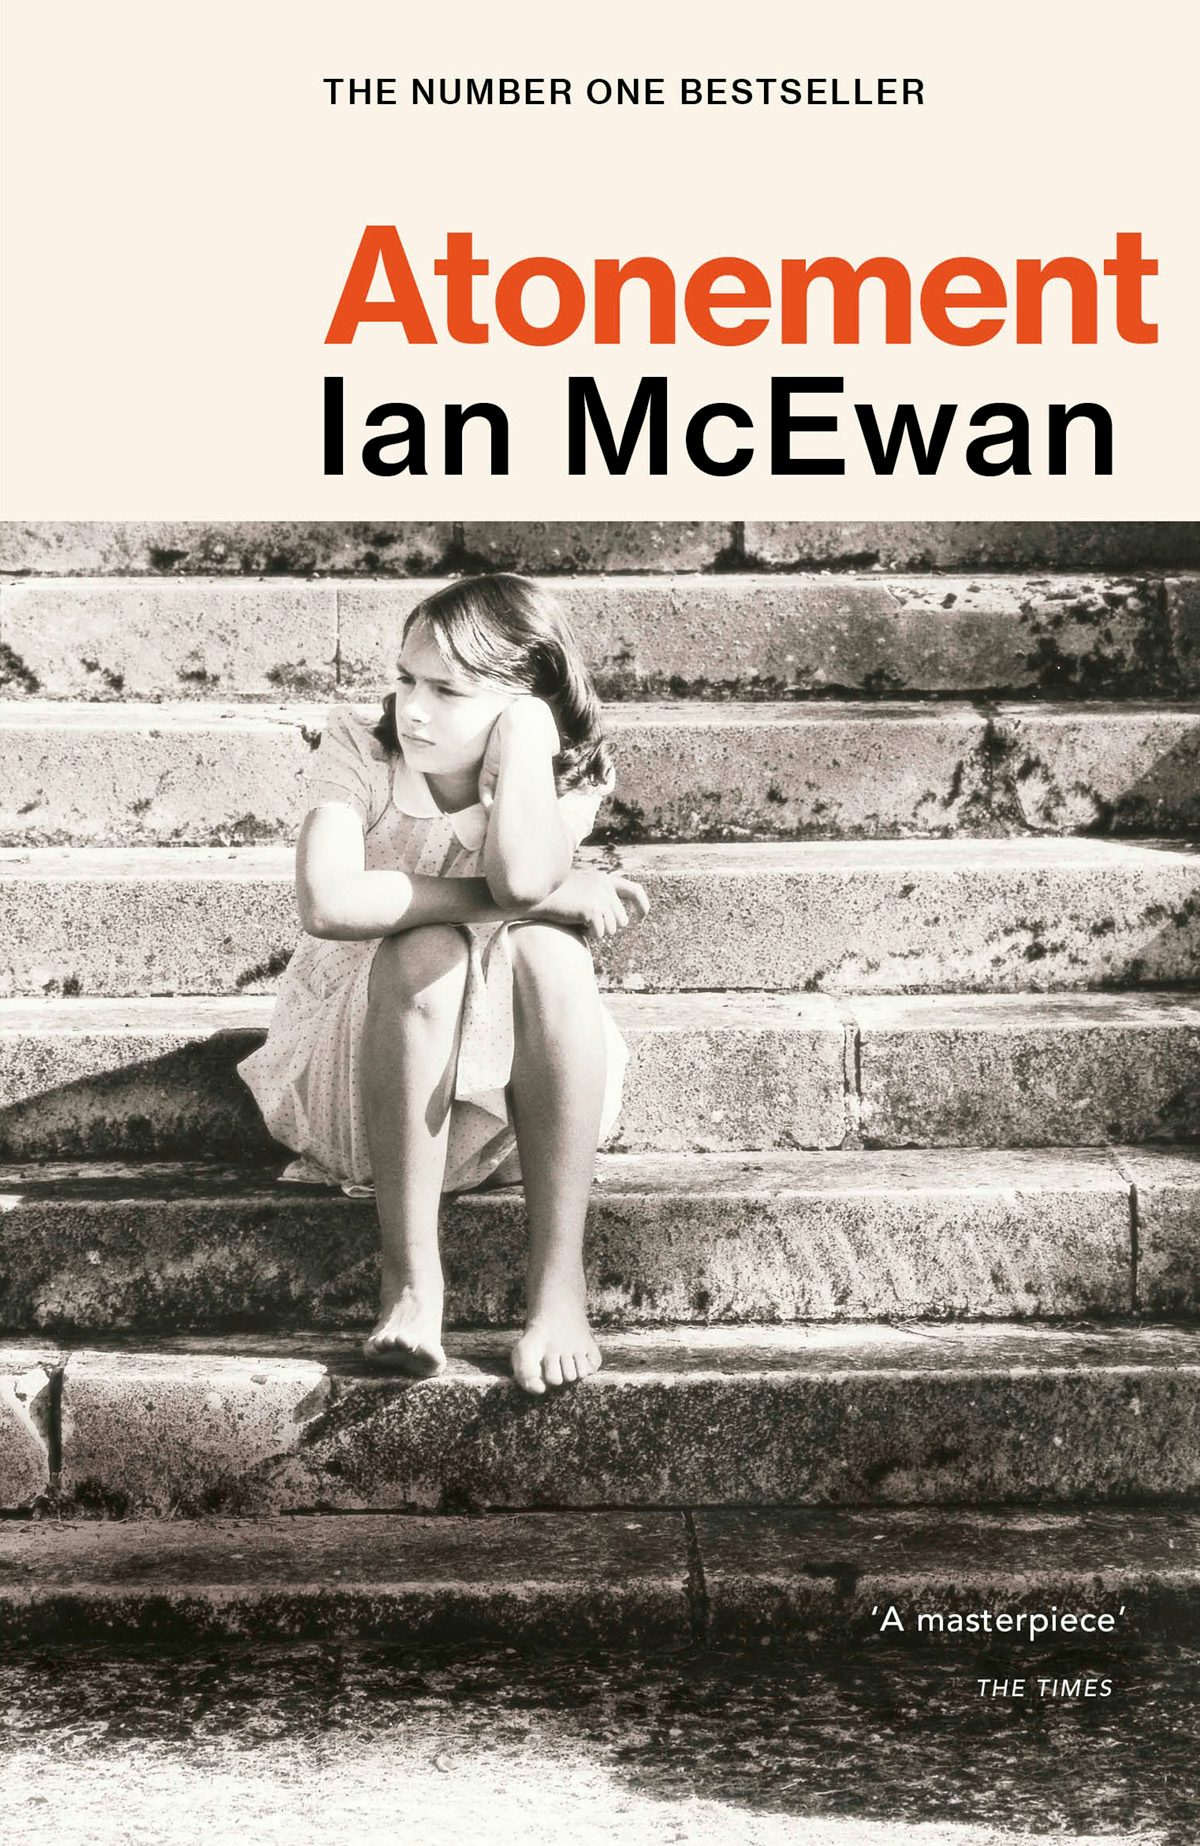 Cover of Atonement by Ian McEwan showing a black and white photograph of a young person sat on steps 